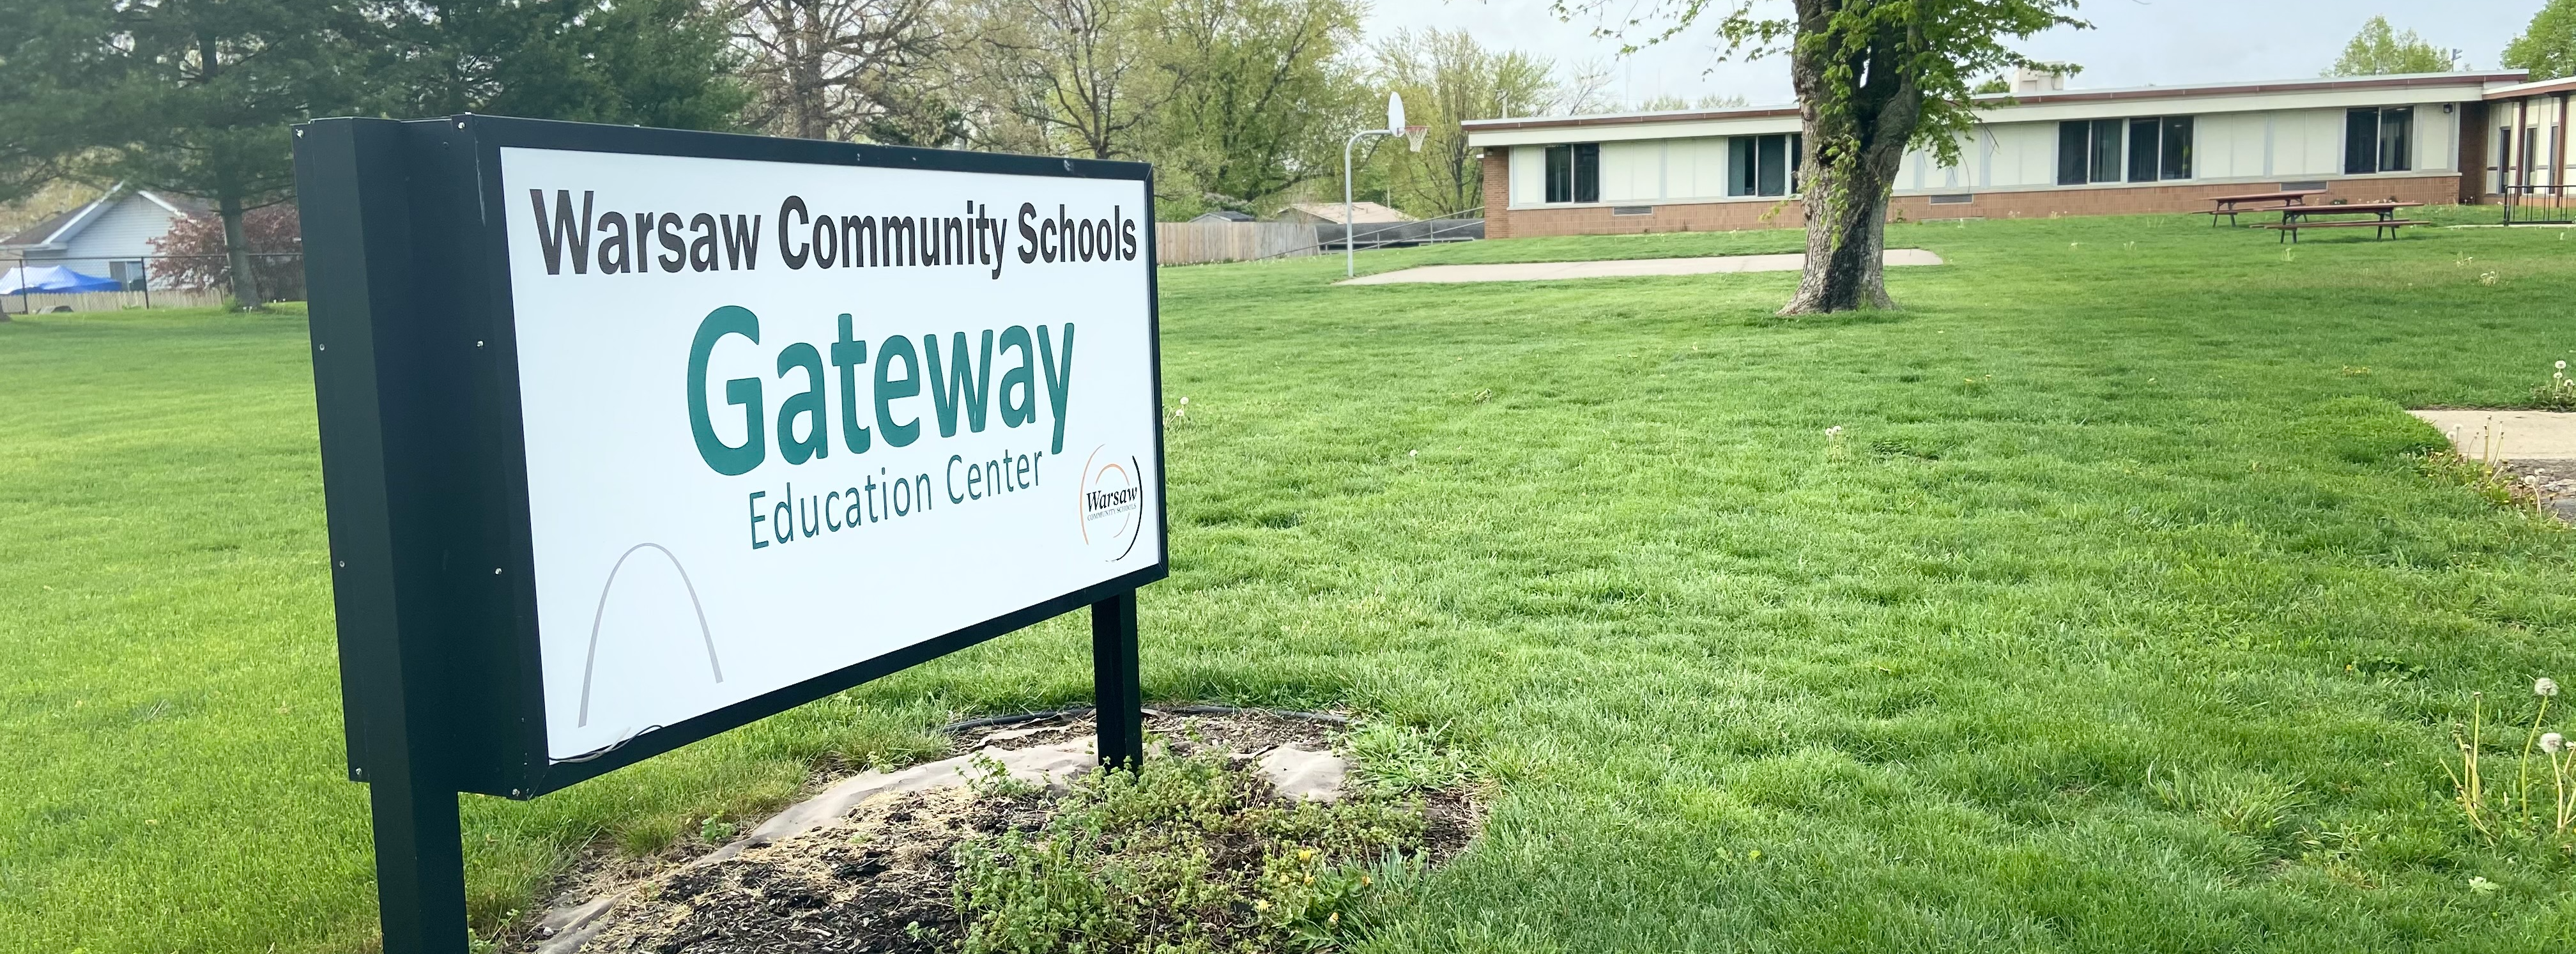 sign for warsaw community schools gateway education center on the grounds outside of the building